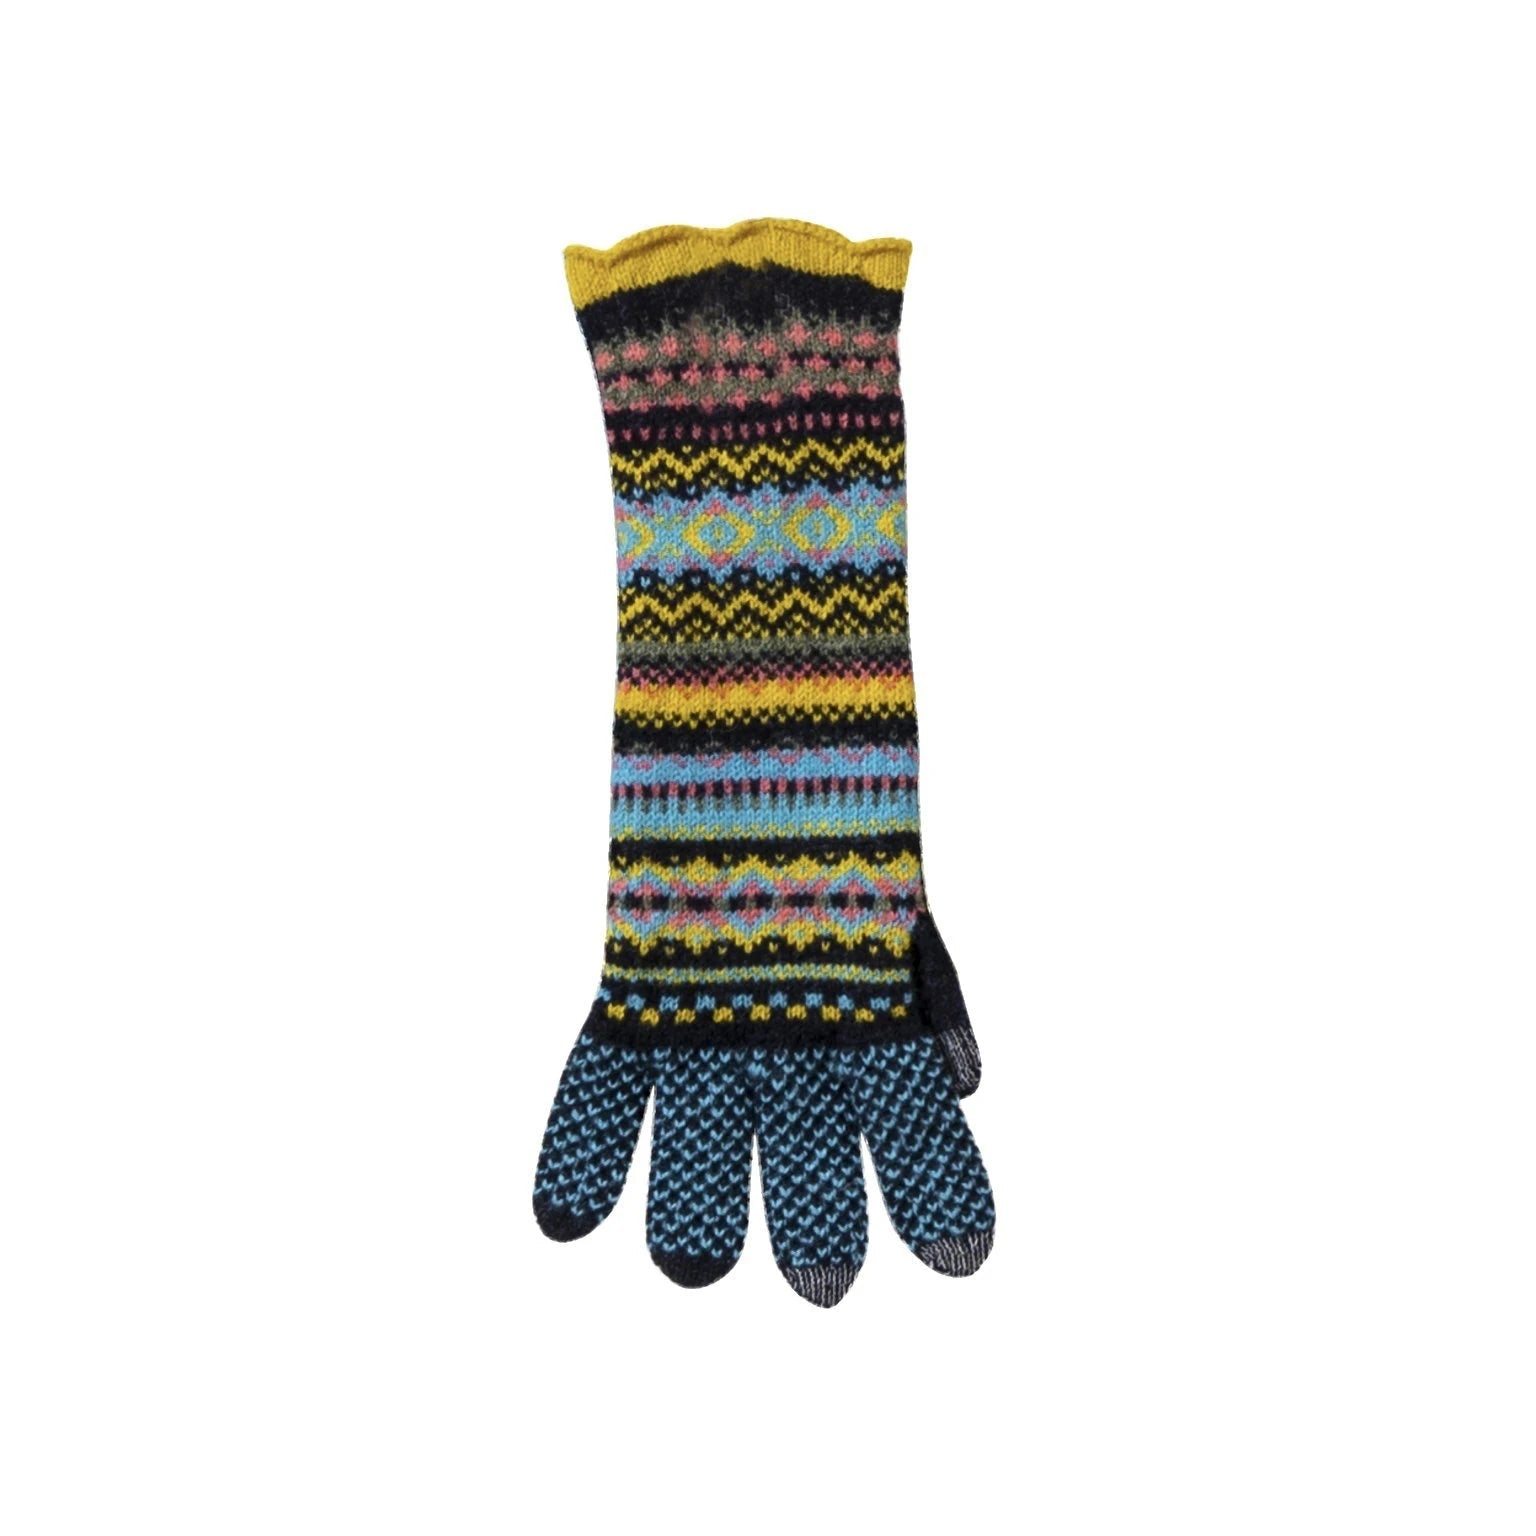 Northern Isles Merino Wool Beanie and Gloves in Blue - L'Atelier Global